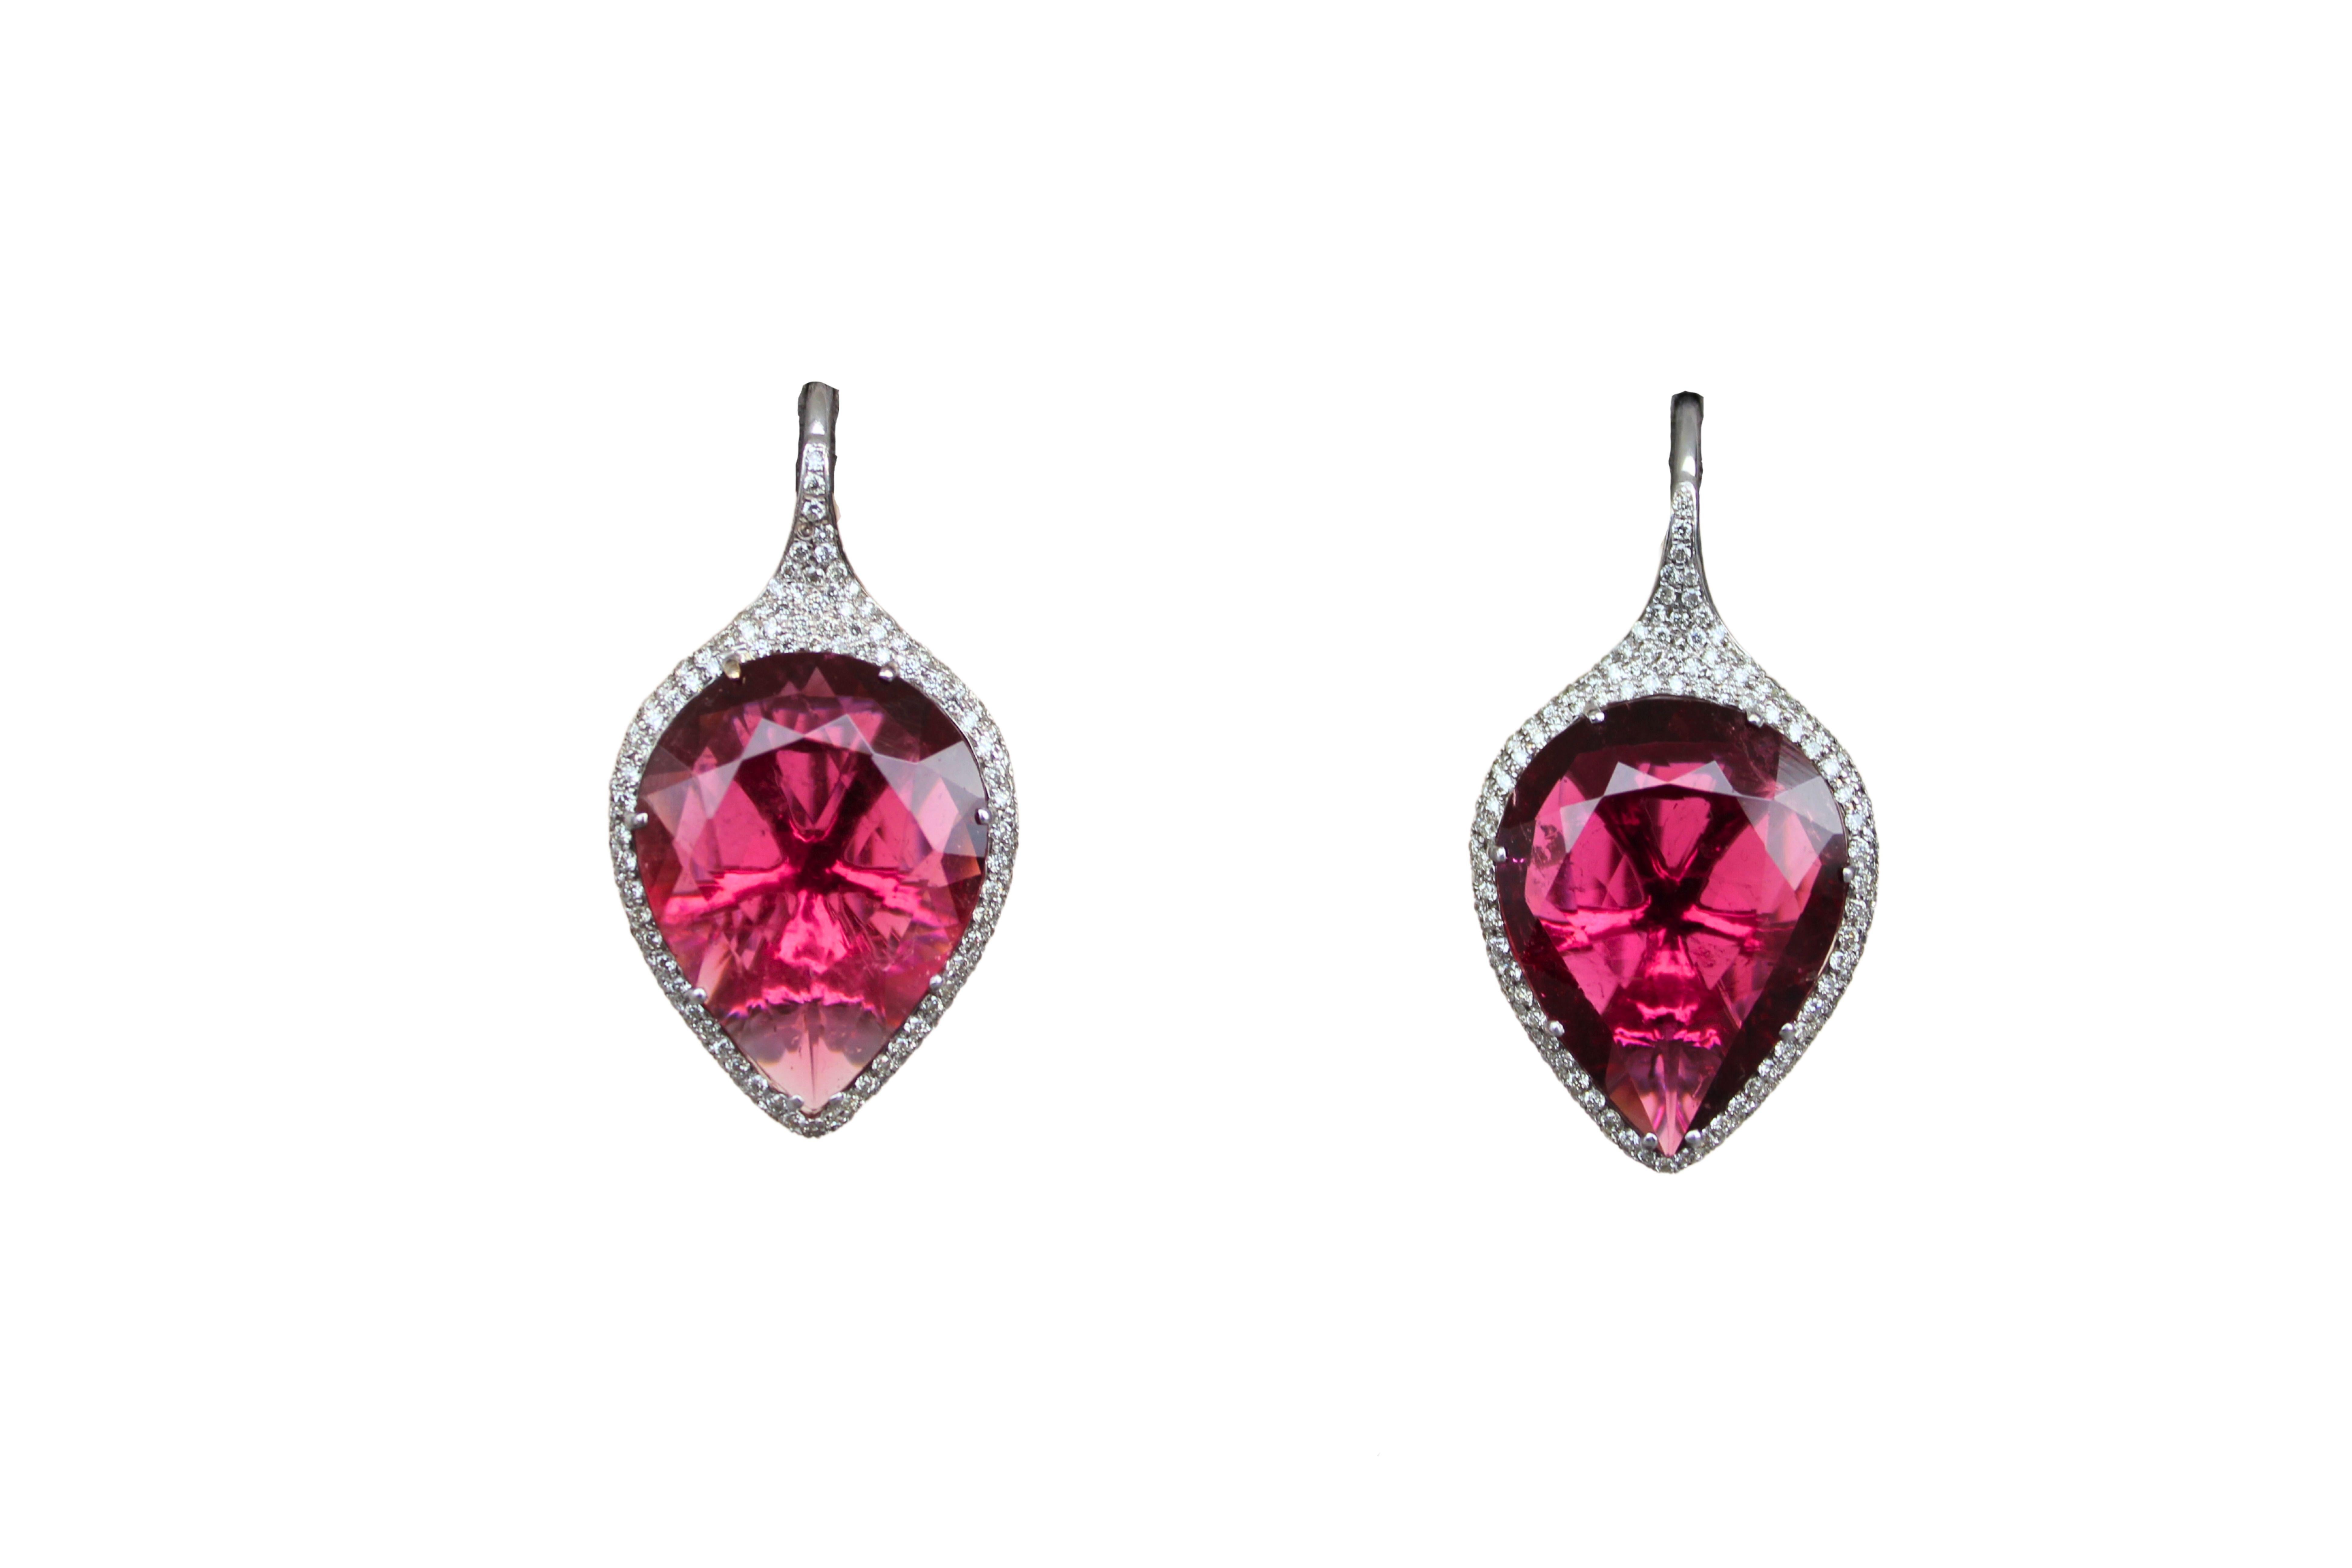 18K White Gold
20 CTW of Pink Red Rubellites 
Rubellites are in a beautifully symmetric and faceted Pear-Shape form and Brilliant-Cut faceting. 
Around 1 carats of G/VS Quality Grade Diamonds
Beautiful, Unique, Luxurious earrings
5 CM length from